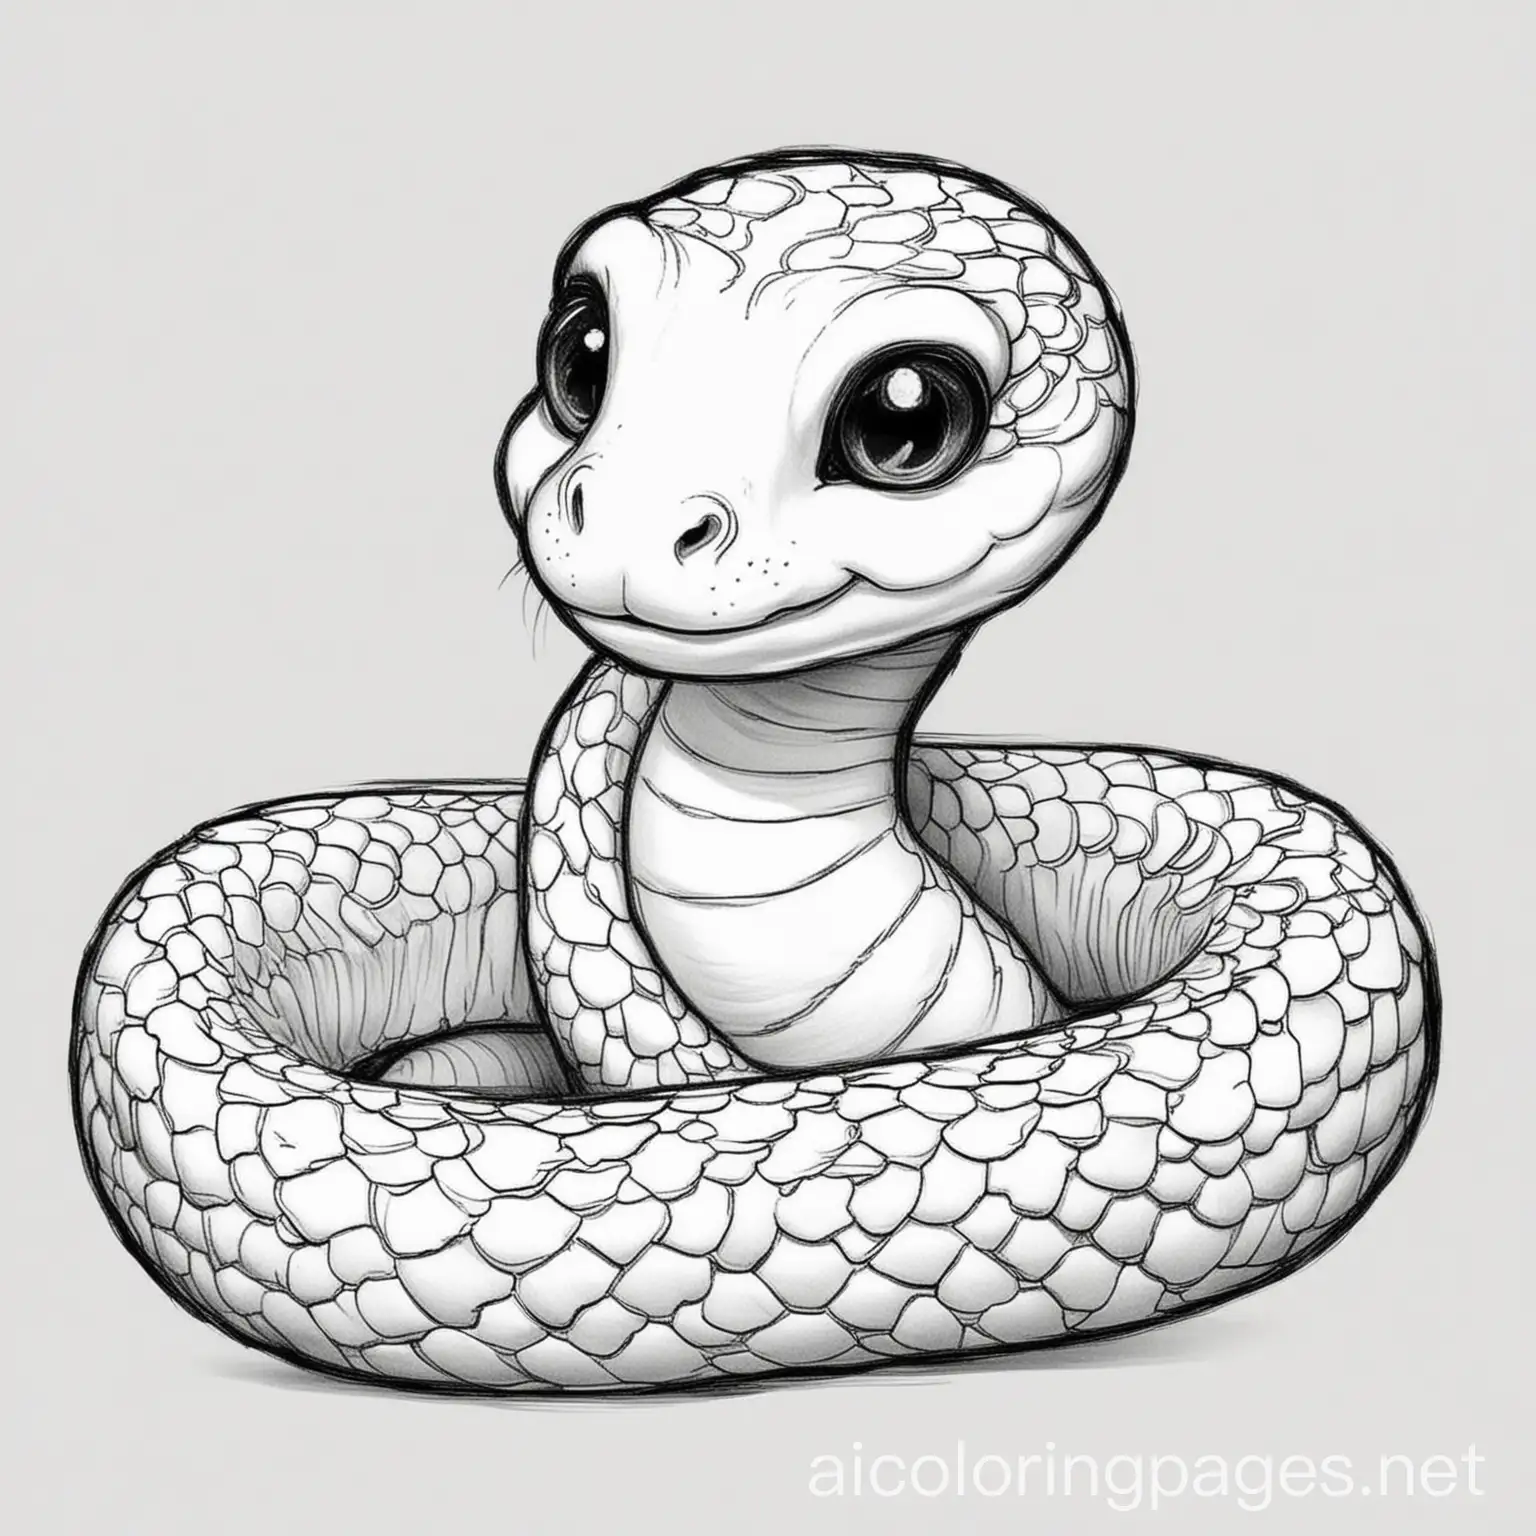 A sweet baby snake to color, Coloring Page, black and white, line art, white background, Simplicity, Ample White Space.